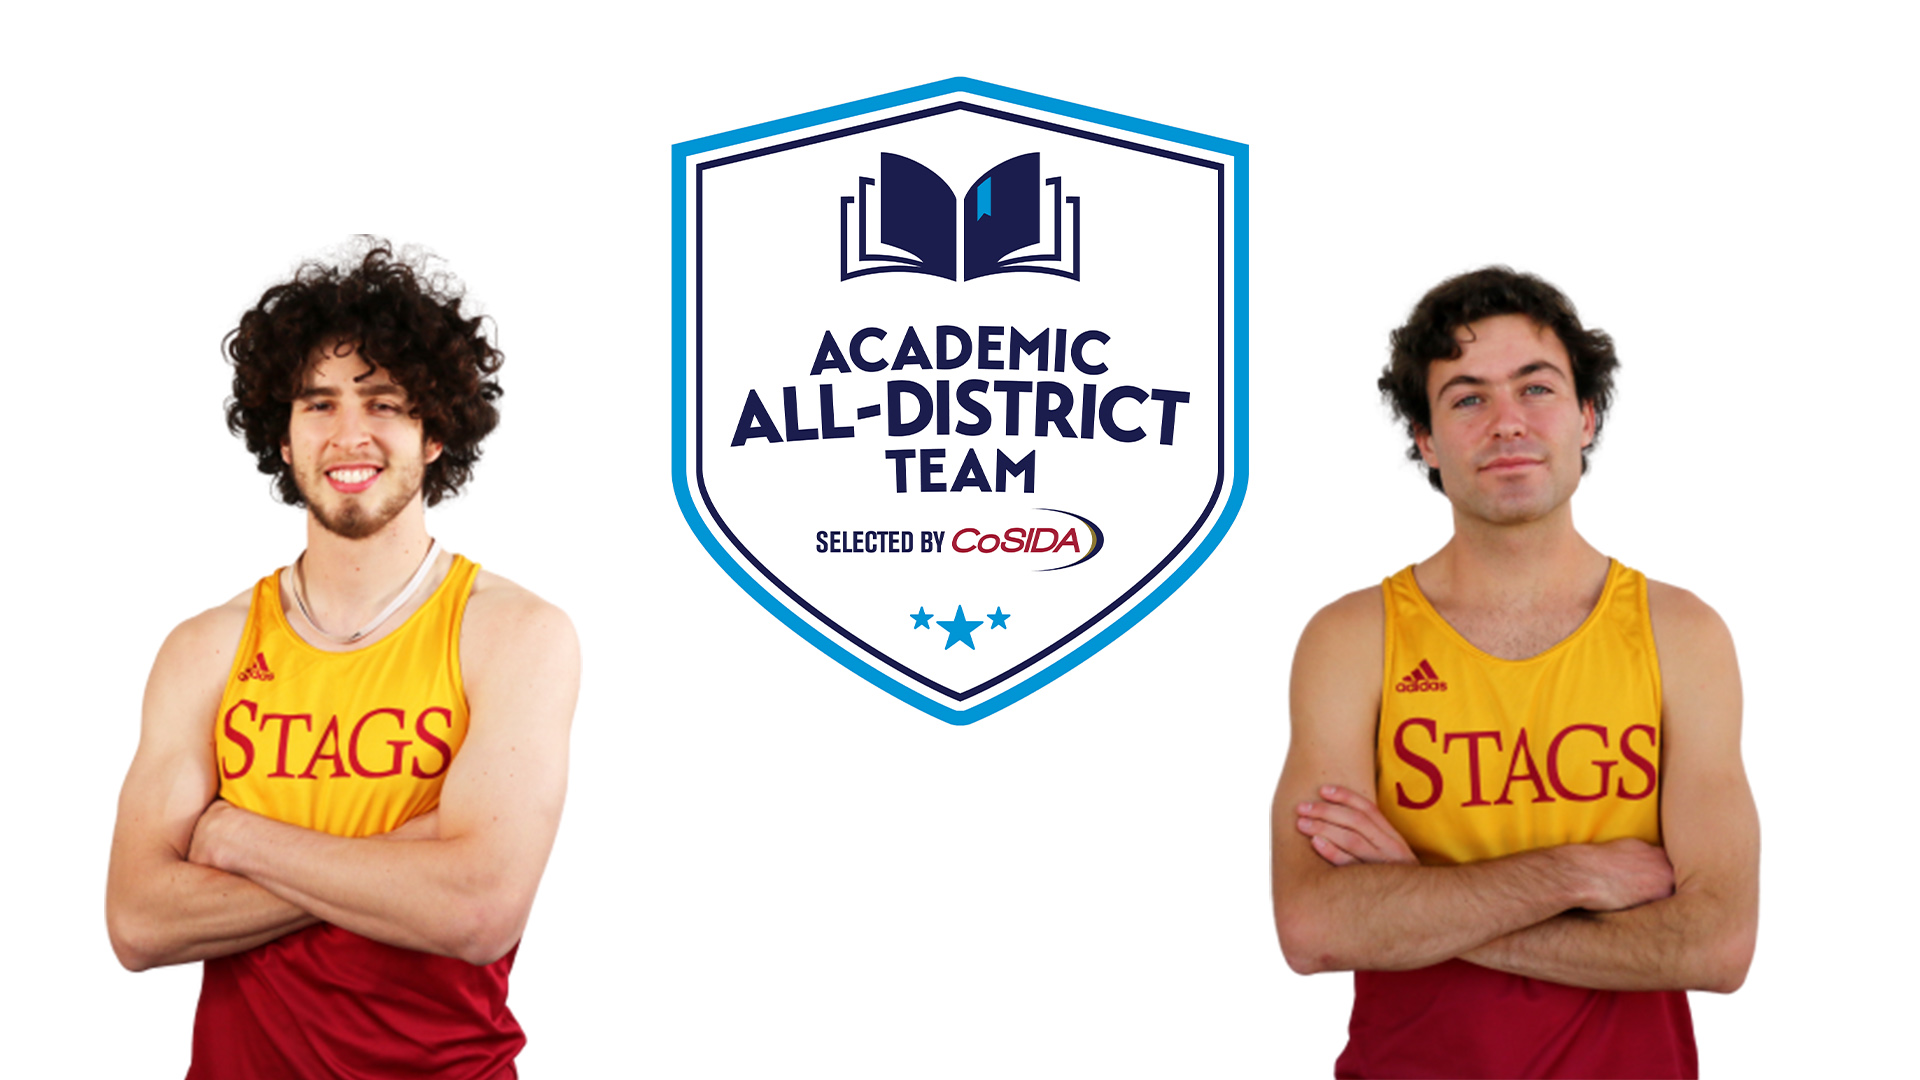 Jamie Cockburn (l) and Henry Pick (r) earned Academic All-District selections